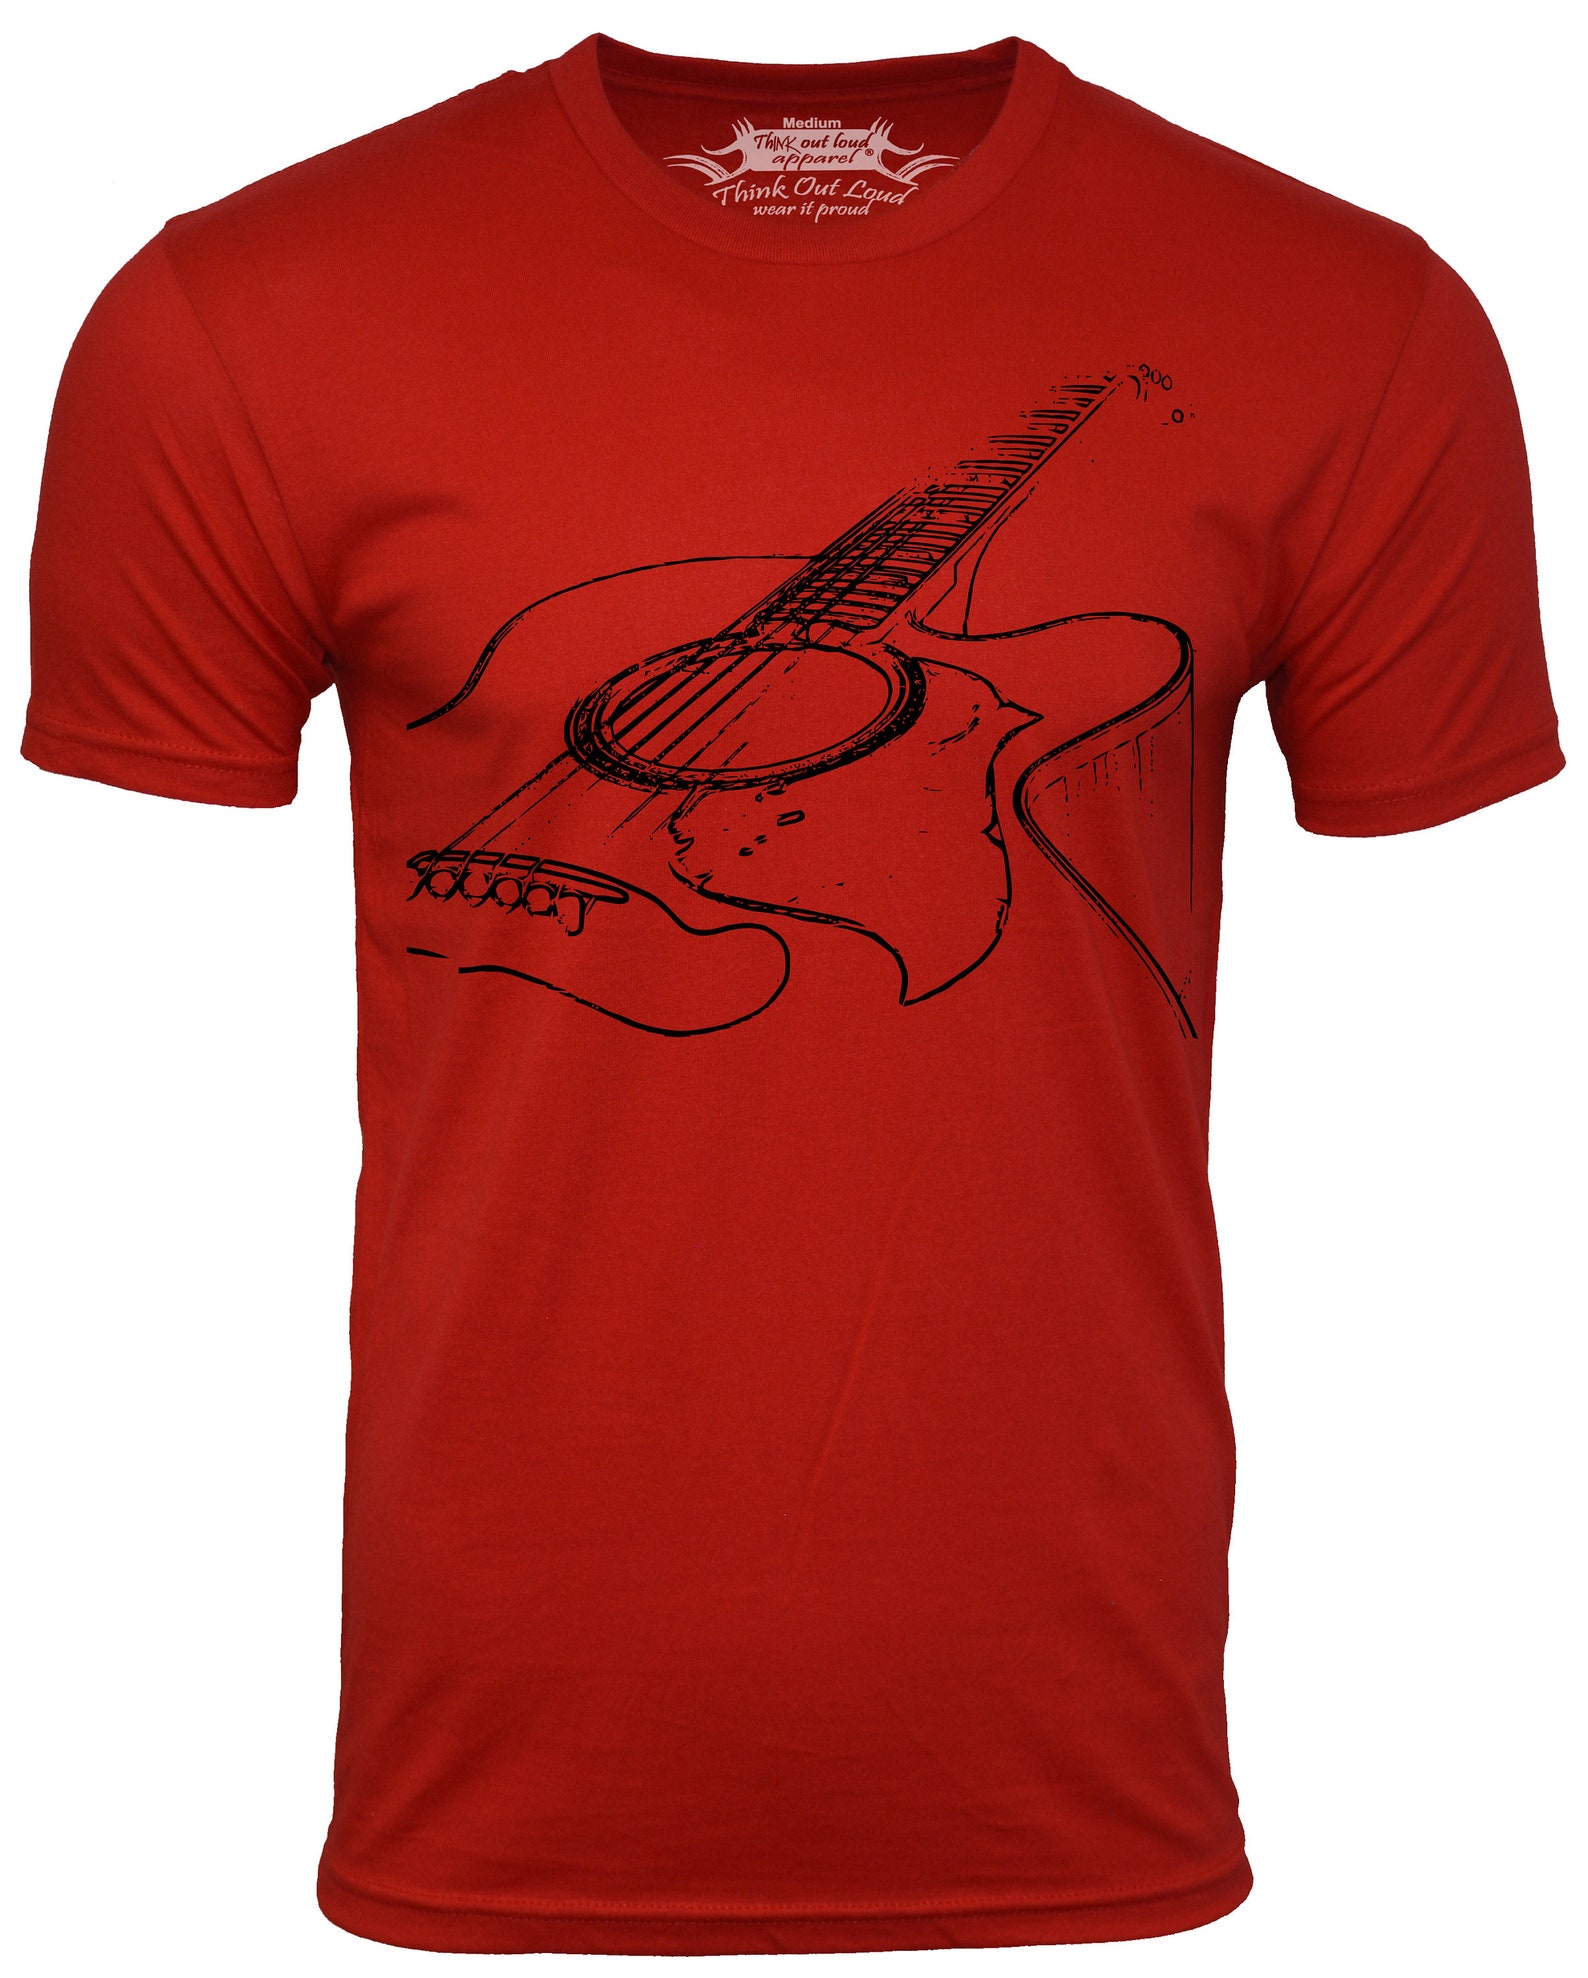 Acoustic Guitar T-Shirt Musician Tee Think Out Loud Apparel | Etsy